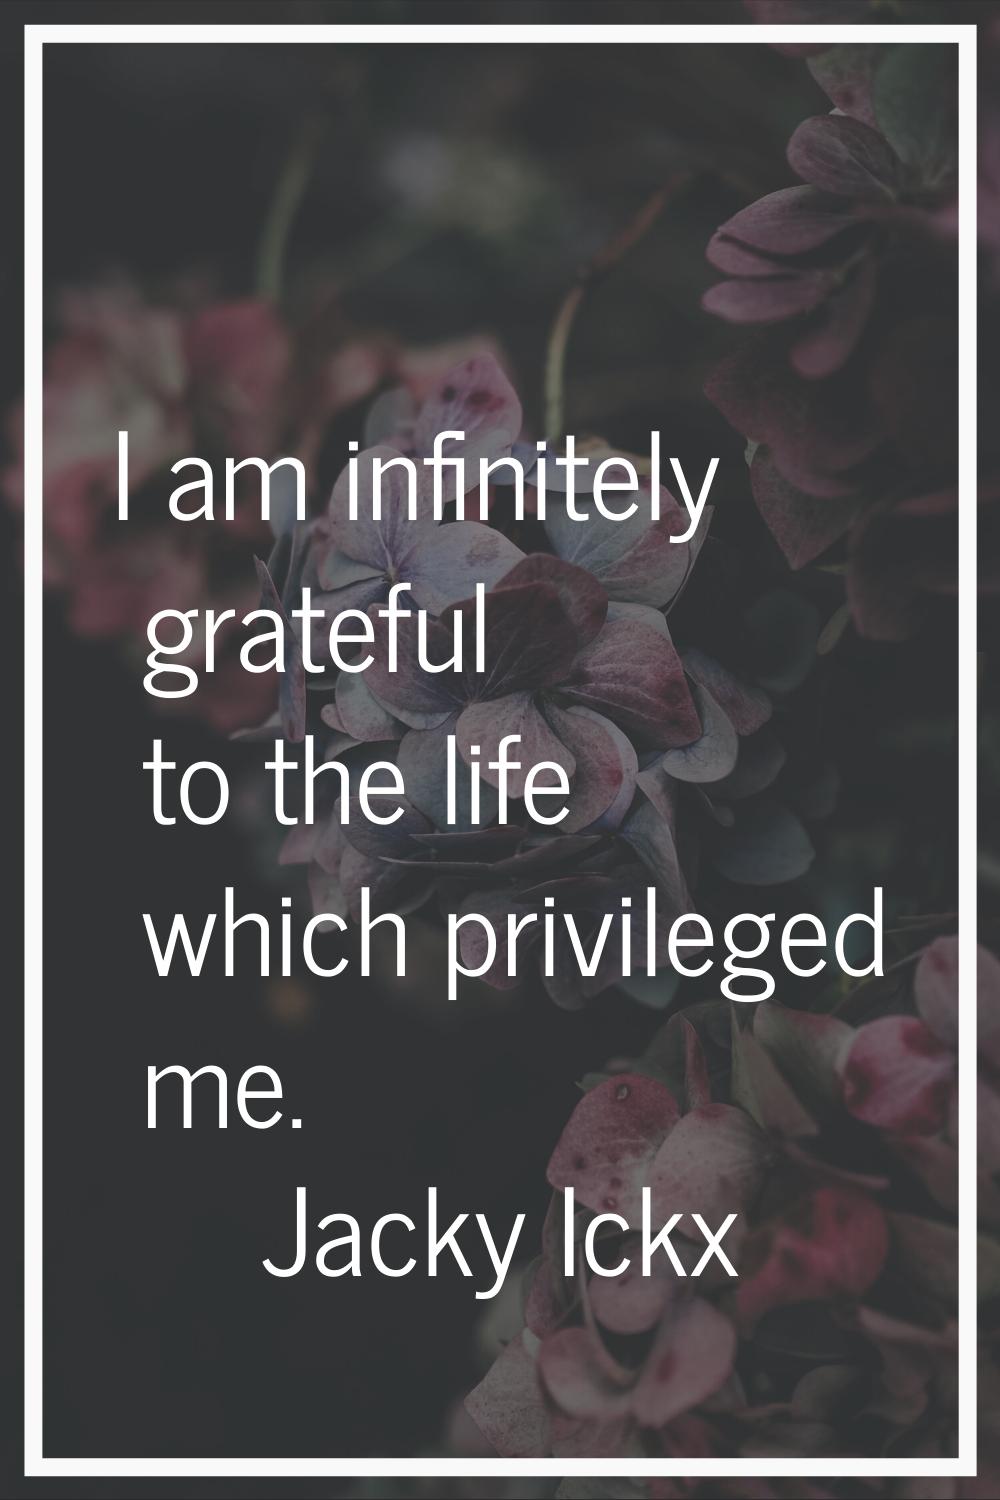 I am infinitely grateful to the life which privileged me.